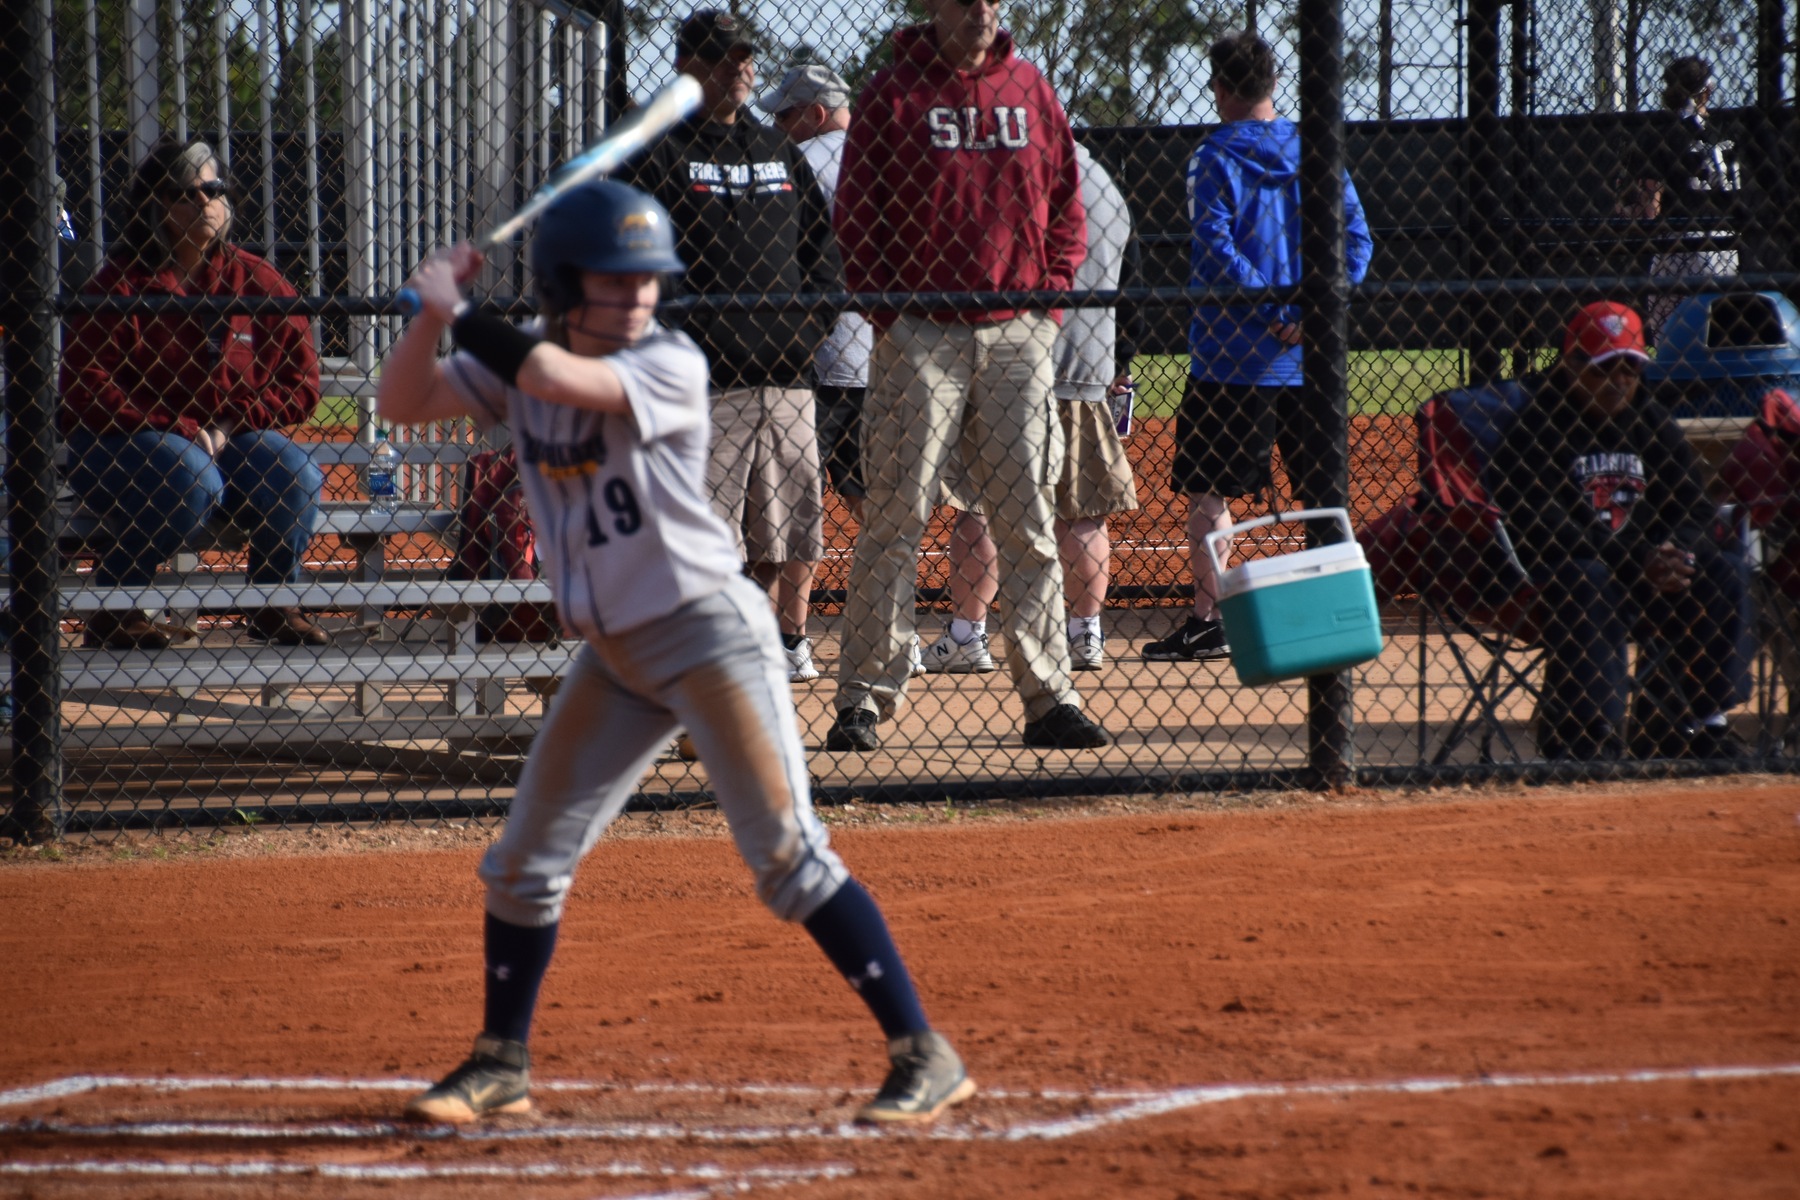 Softball offense carries them to sweep over Lasell